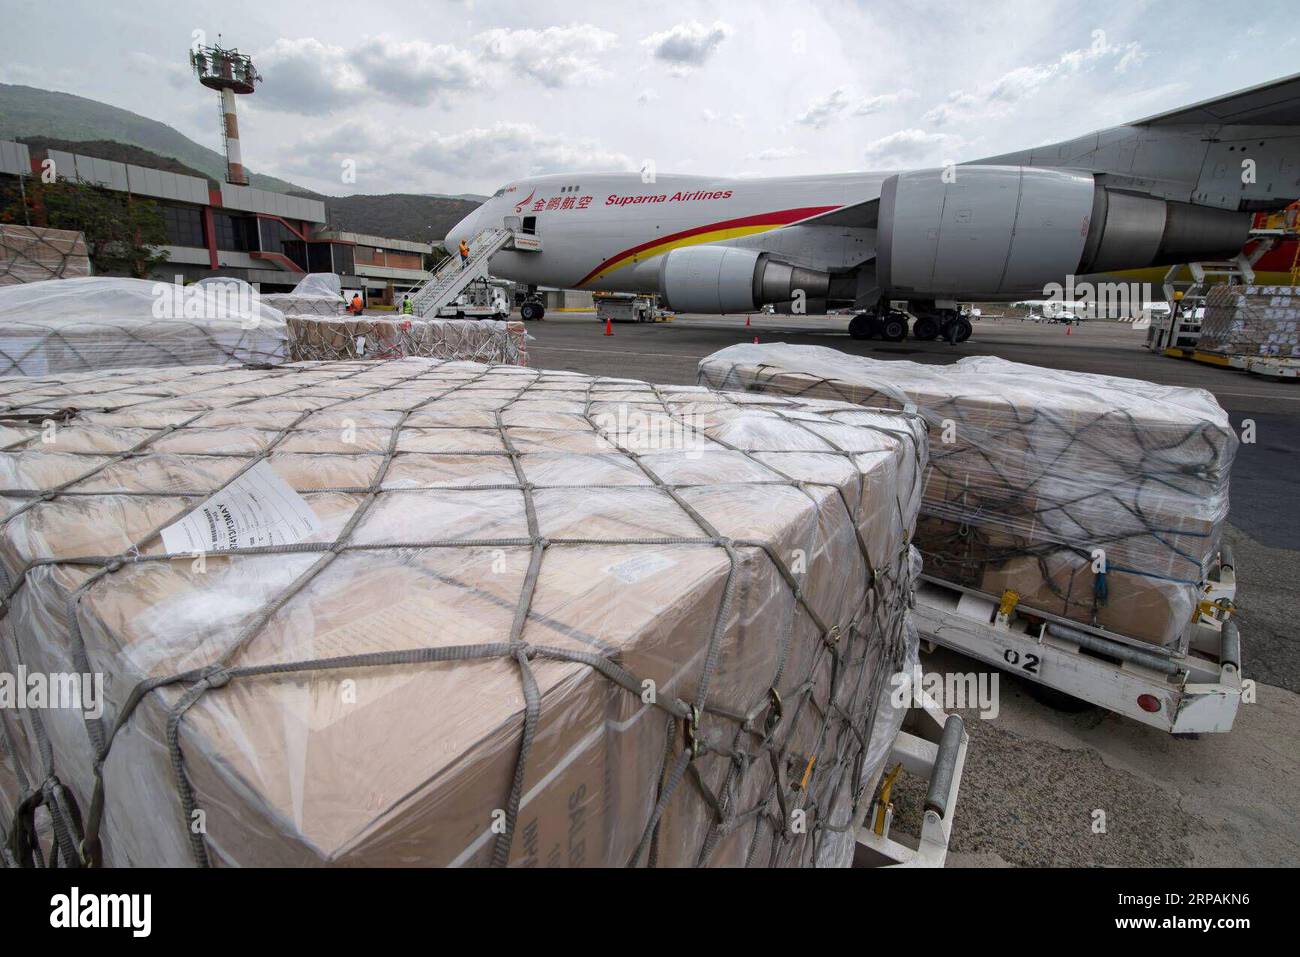 (190514) -- Venezuela , May 14, 2019 -- The second shipment of medical aid from China arrived at the Simon Bolivar International Airport in Caracas, Venezuela, May 13, 2019. The 71 tonnes of aid mainly consists of medicines and medical supplies. The first batch of medical assistance from China, made up of 65 tonnes of medicines and medical supplies, arrived in Venezuela in March. ) VENEZUELA-CHINA-MEDICAL AID MarcosxSalgado PUBLICATIONxNOTxINxCHN Stock Photo